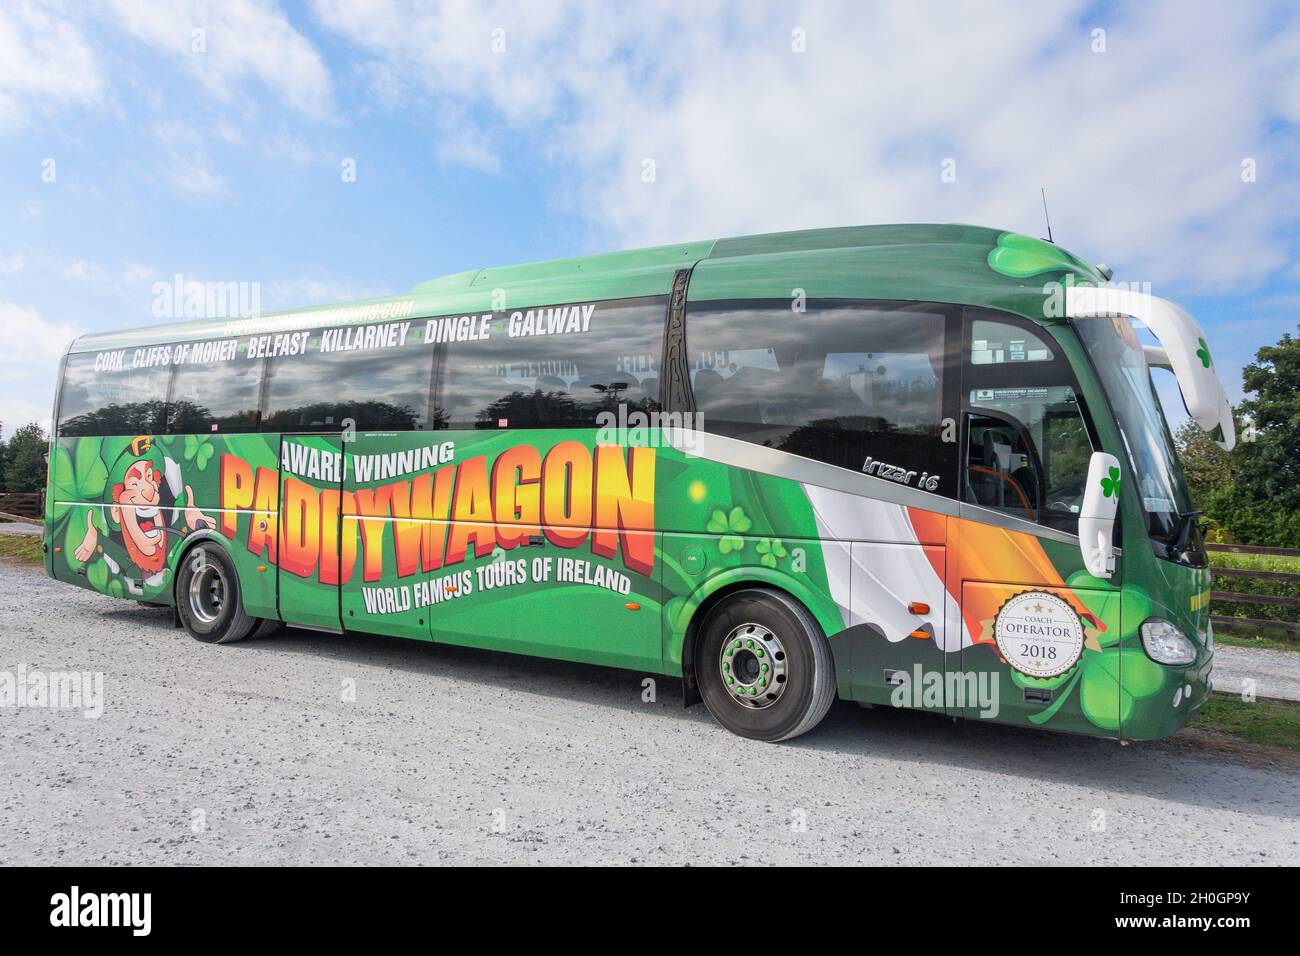 Paddywagon sightseeing bus at Dunguaire Castle (Dun Guaire), Kinvara, Galway Bay, County Galway, Republic of Ireland Stock Photo